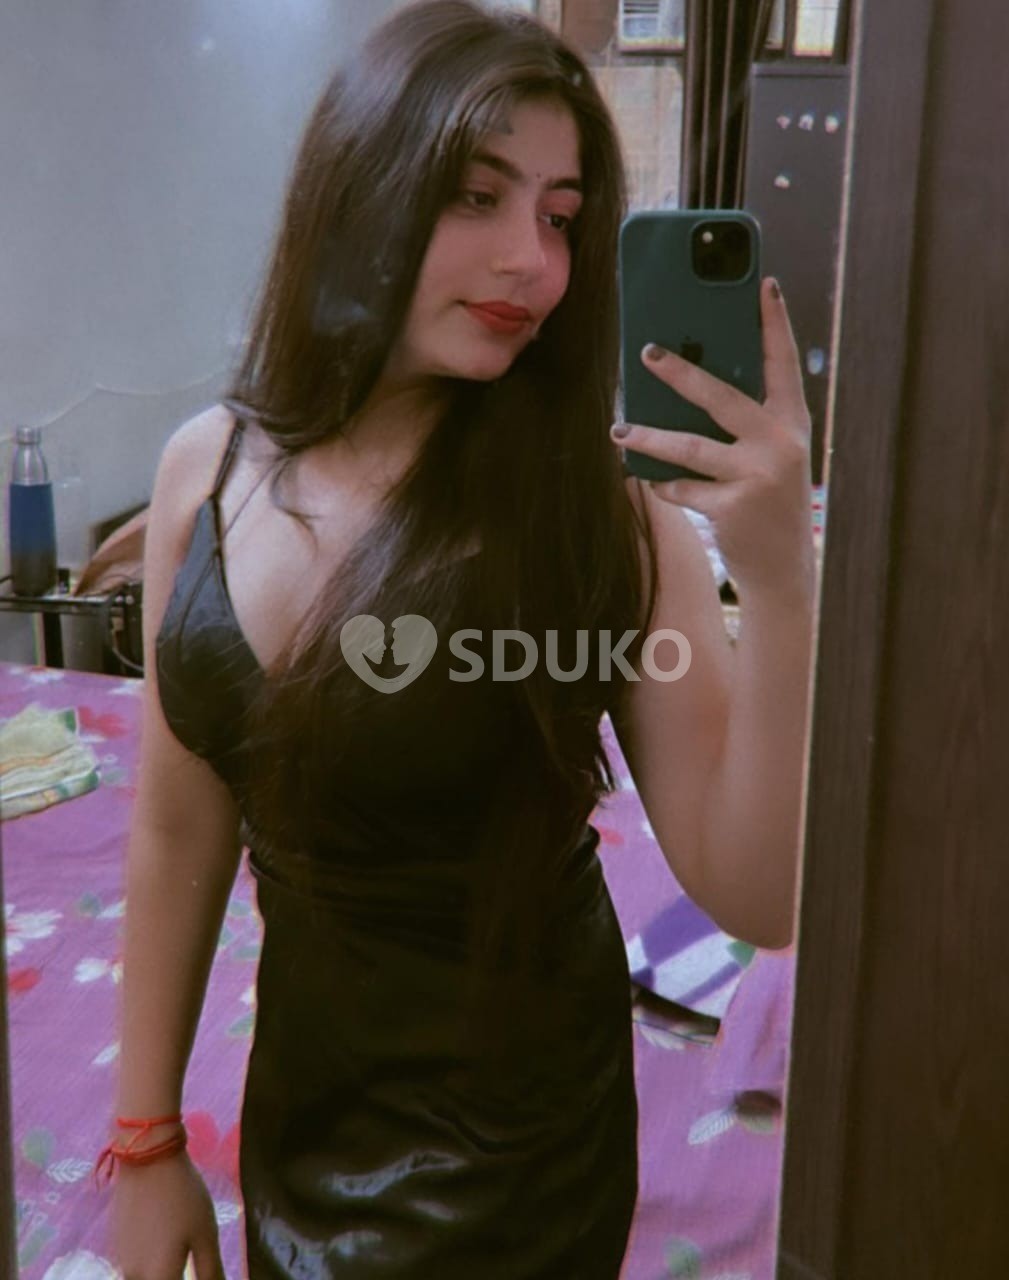 Solapur ⭐ ⭐ Best Vvip High Profile College And Bhabhis Safe Escort Service Available